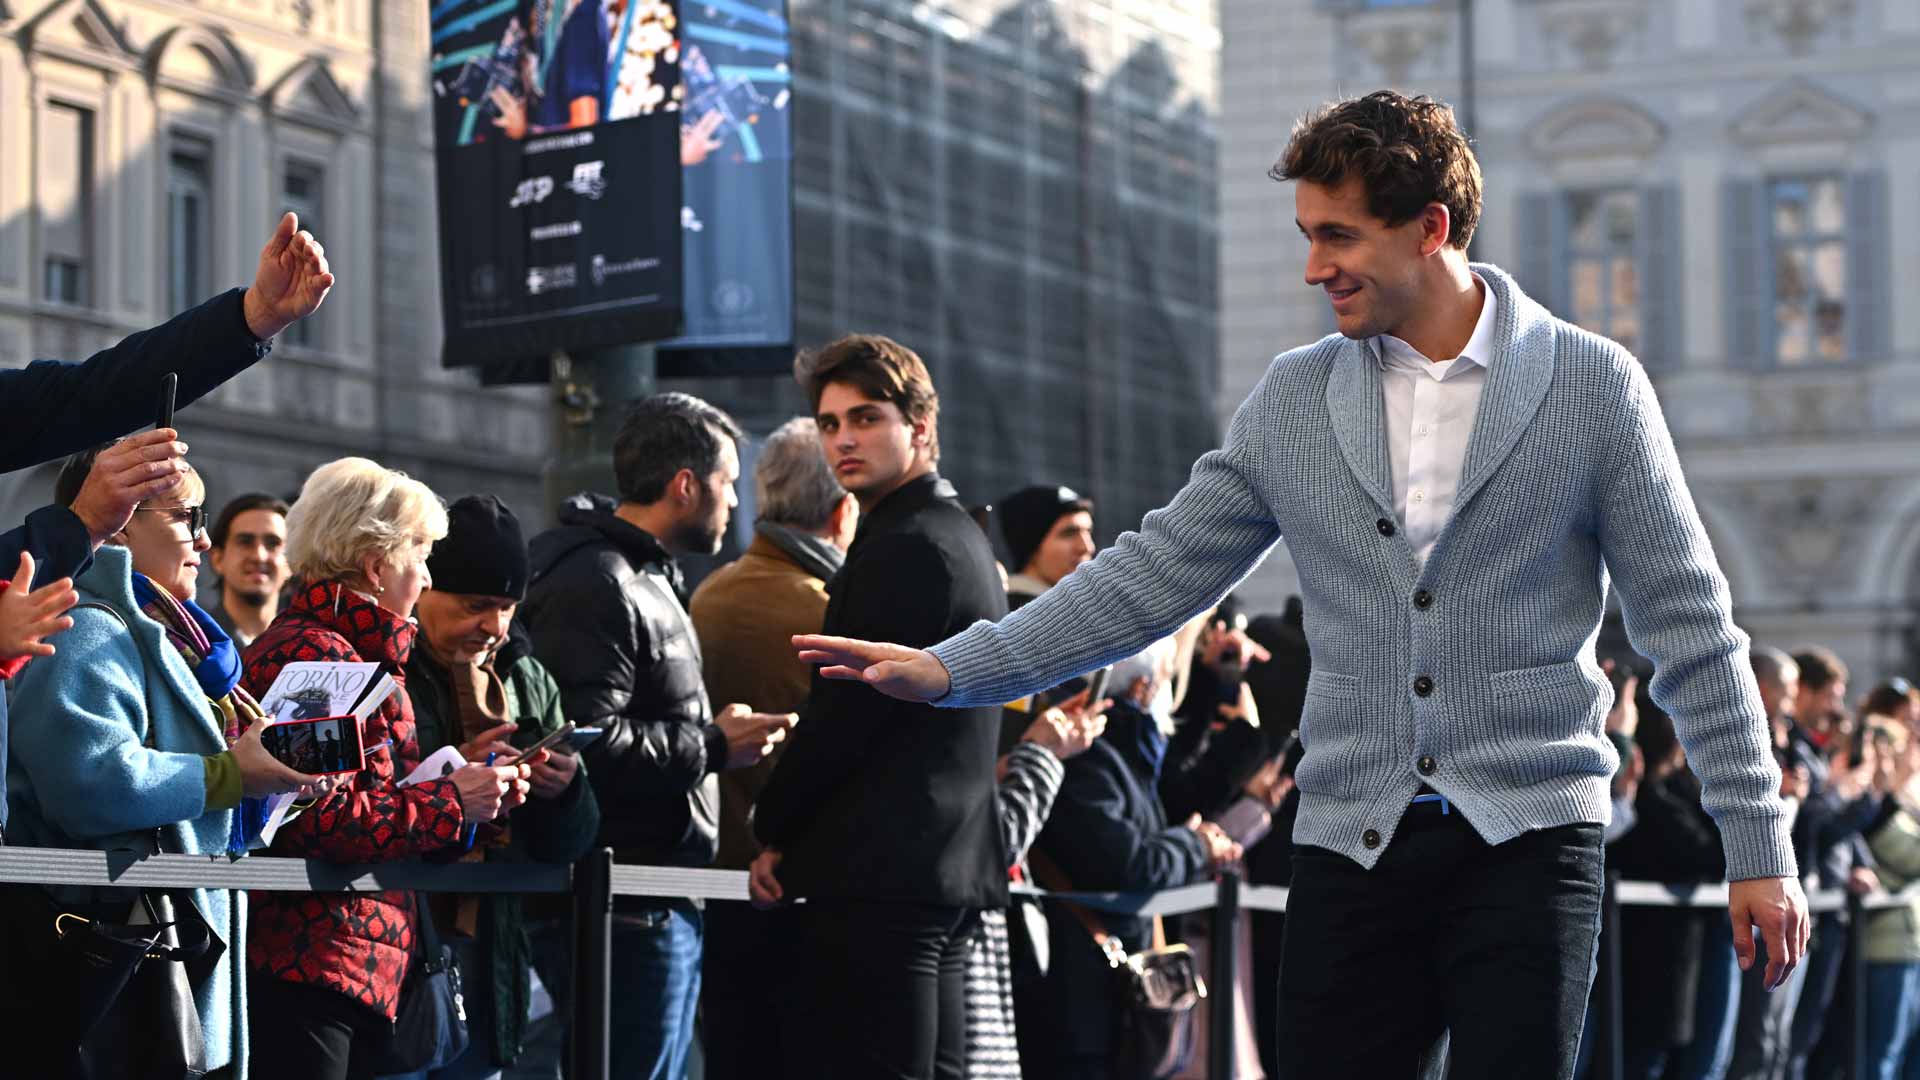 Casper Ruud greets fans at the 2022 Nitto ATP Finals media day.